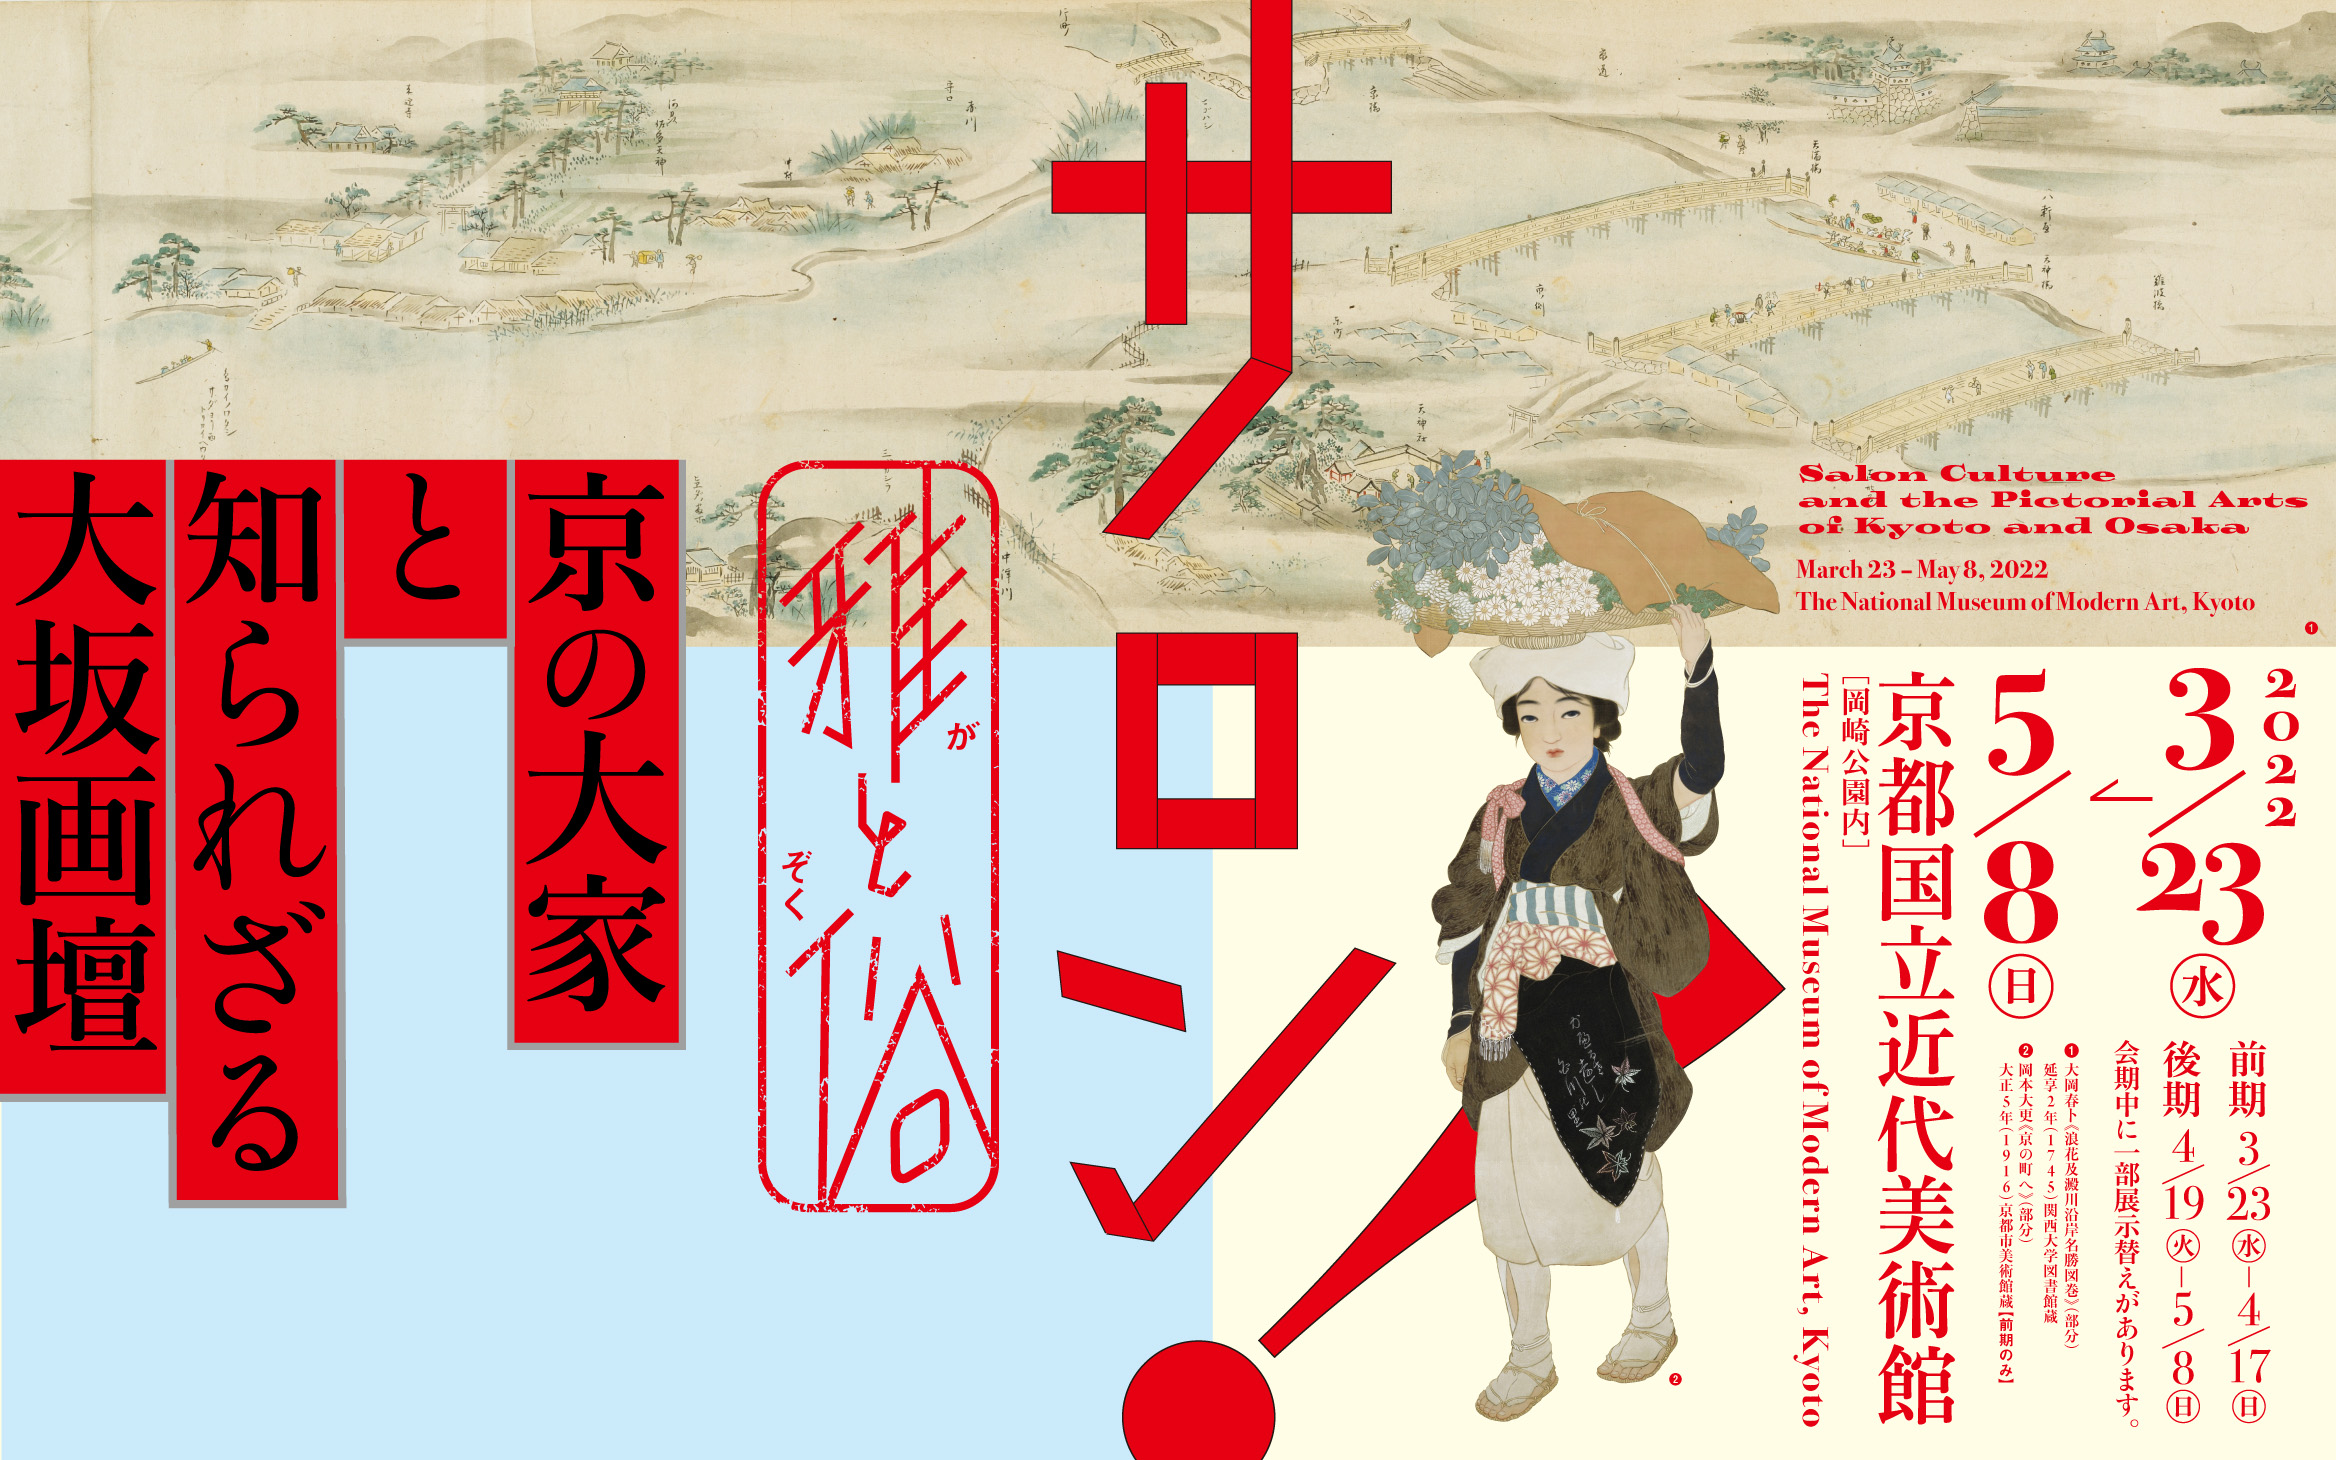 Salon Culture and the Pictorial Arts of Kyoto and Osaka